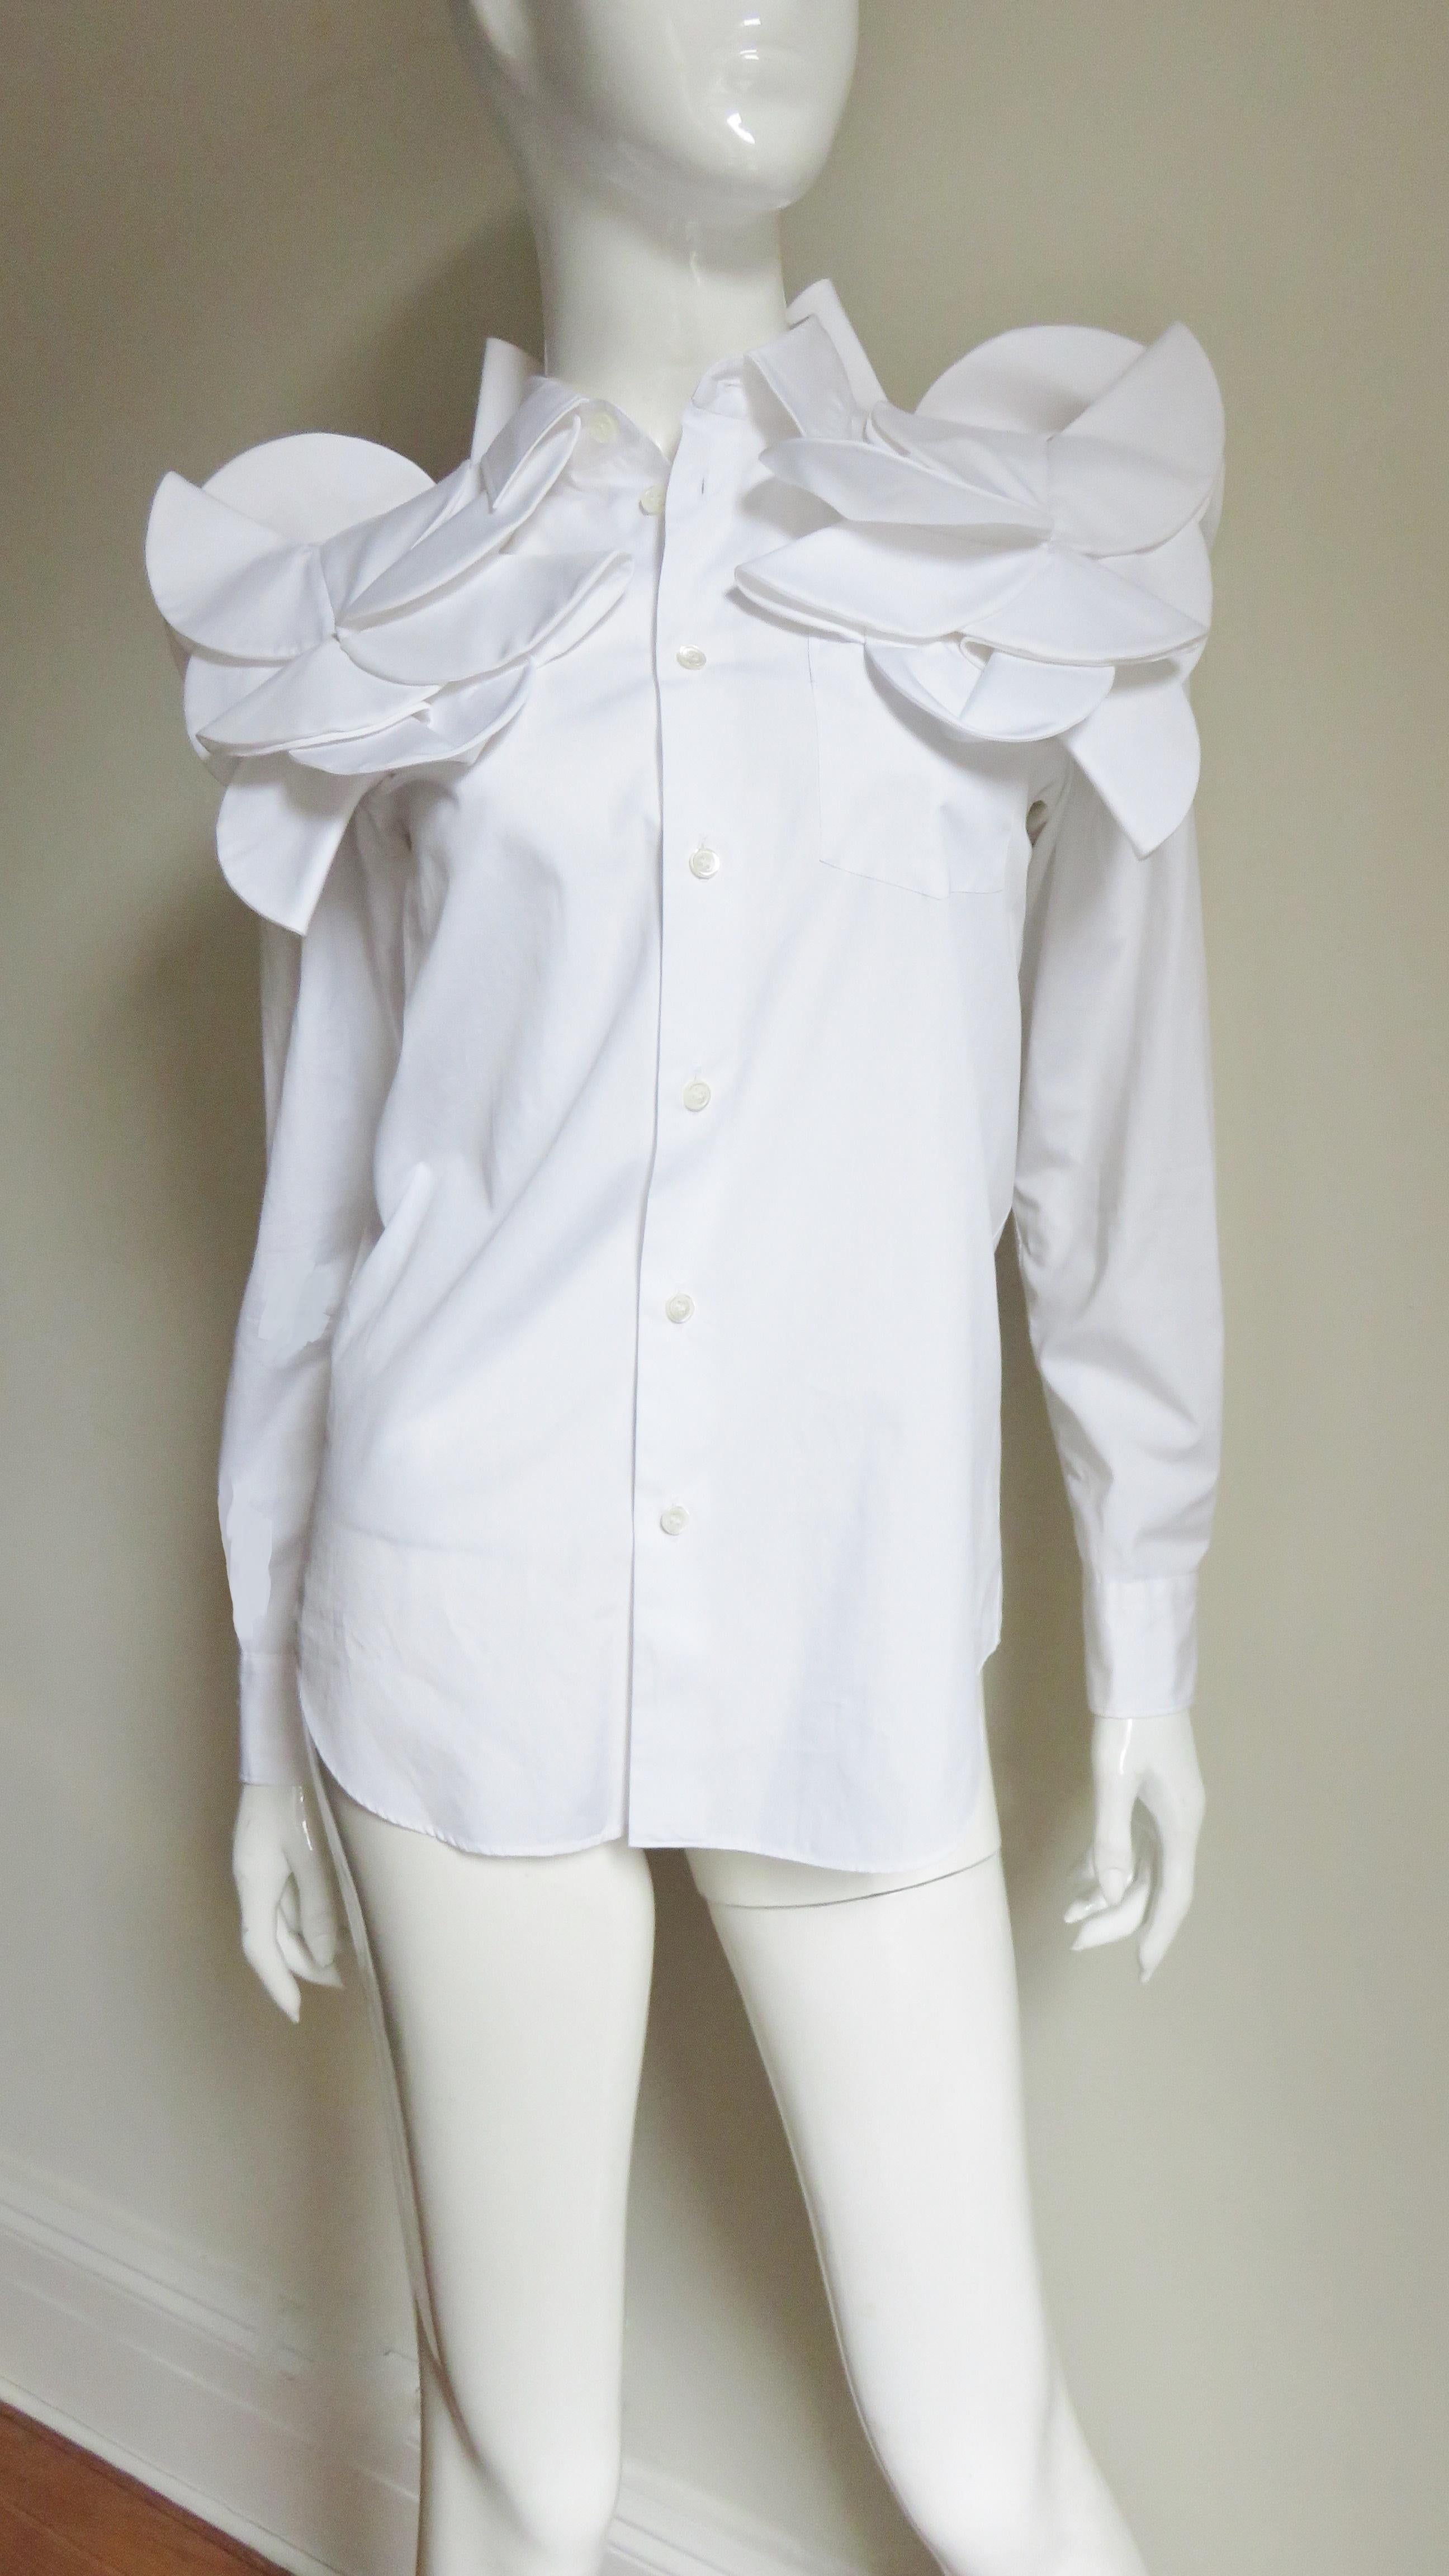 A fabulous white cotton shirt by Junya Watanabe for Comme des Garcons.  It has a shirt collar, cuffs and closes up the front with mother of pearl buttons.  Along the shoulders, upper chest and back in the same fabric are fabulous circle appliques